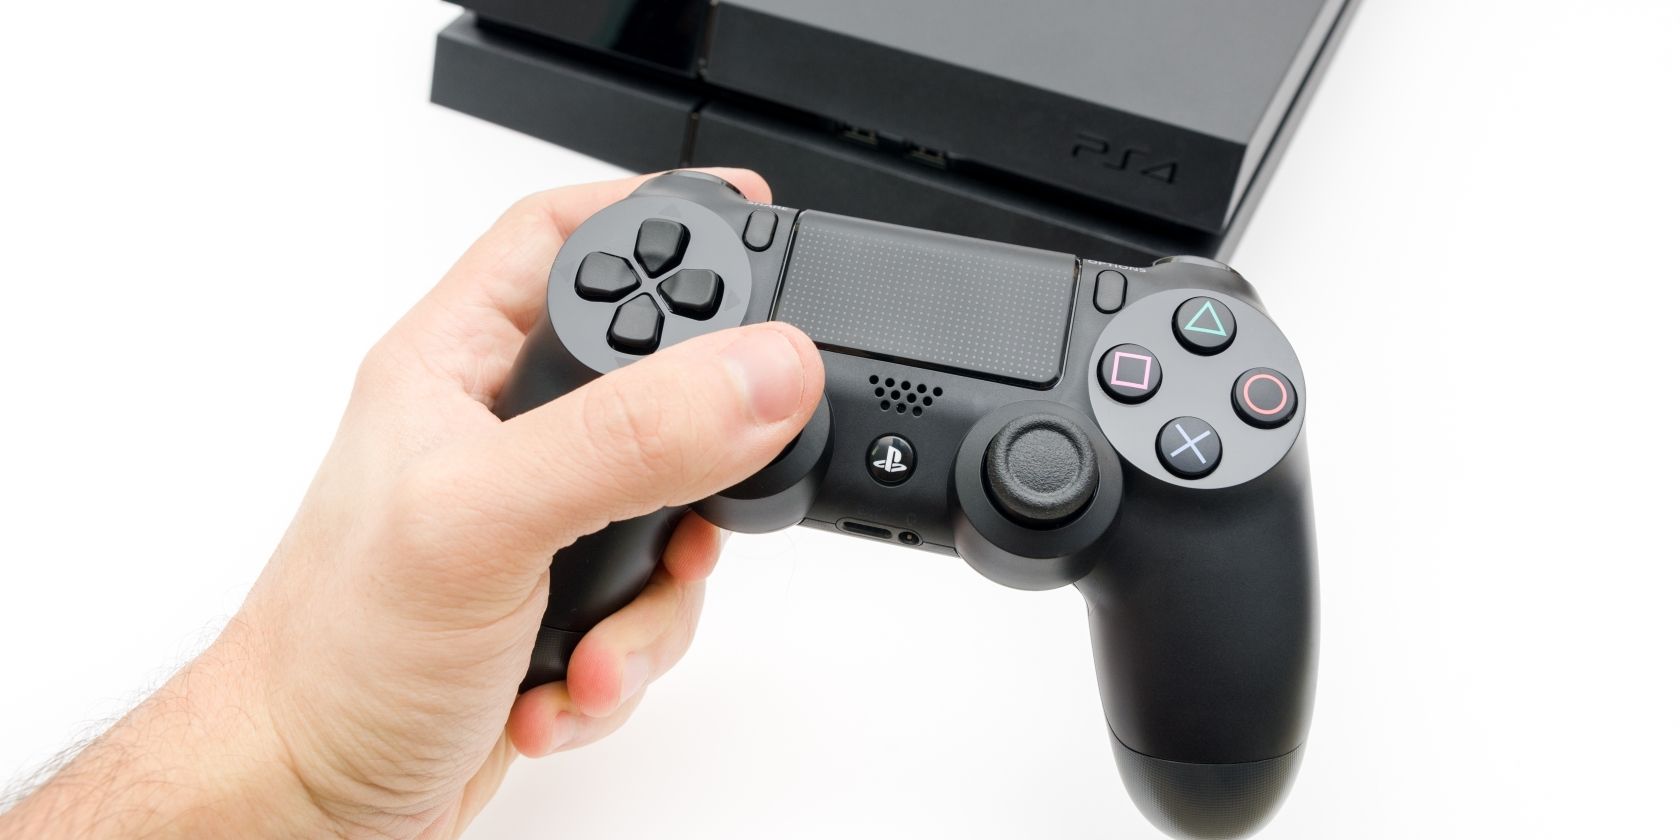 Hand holding PS4 controller in front of PS4 console